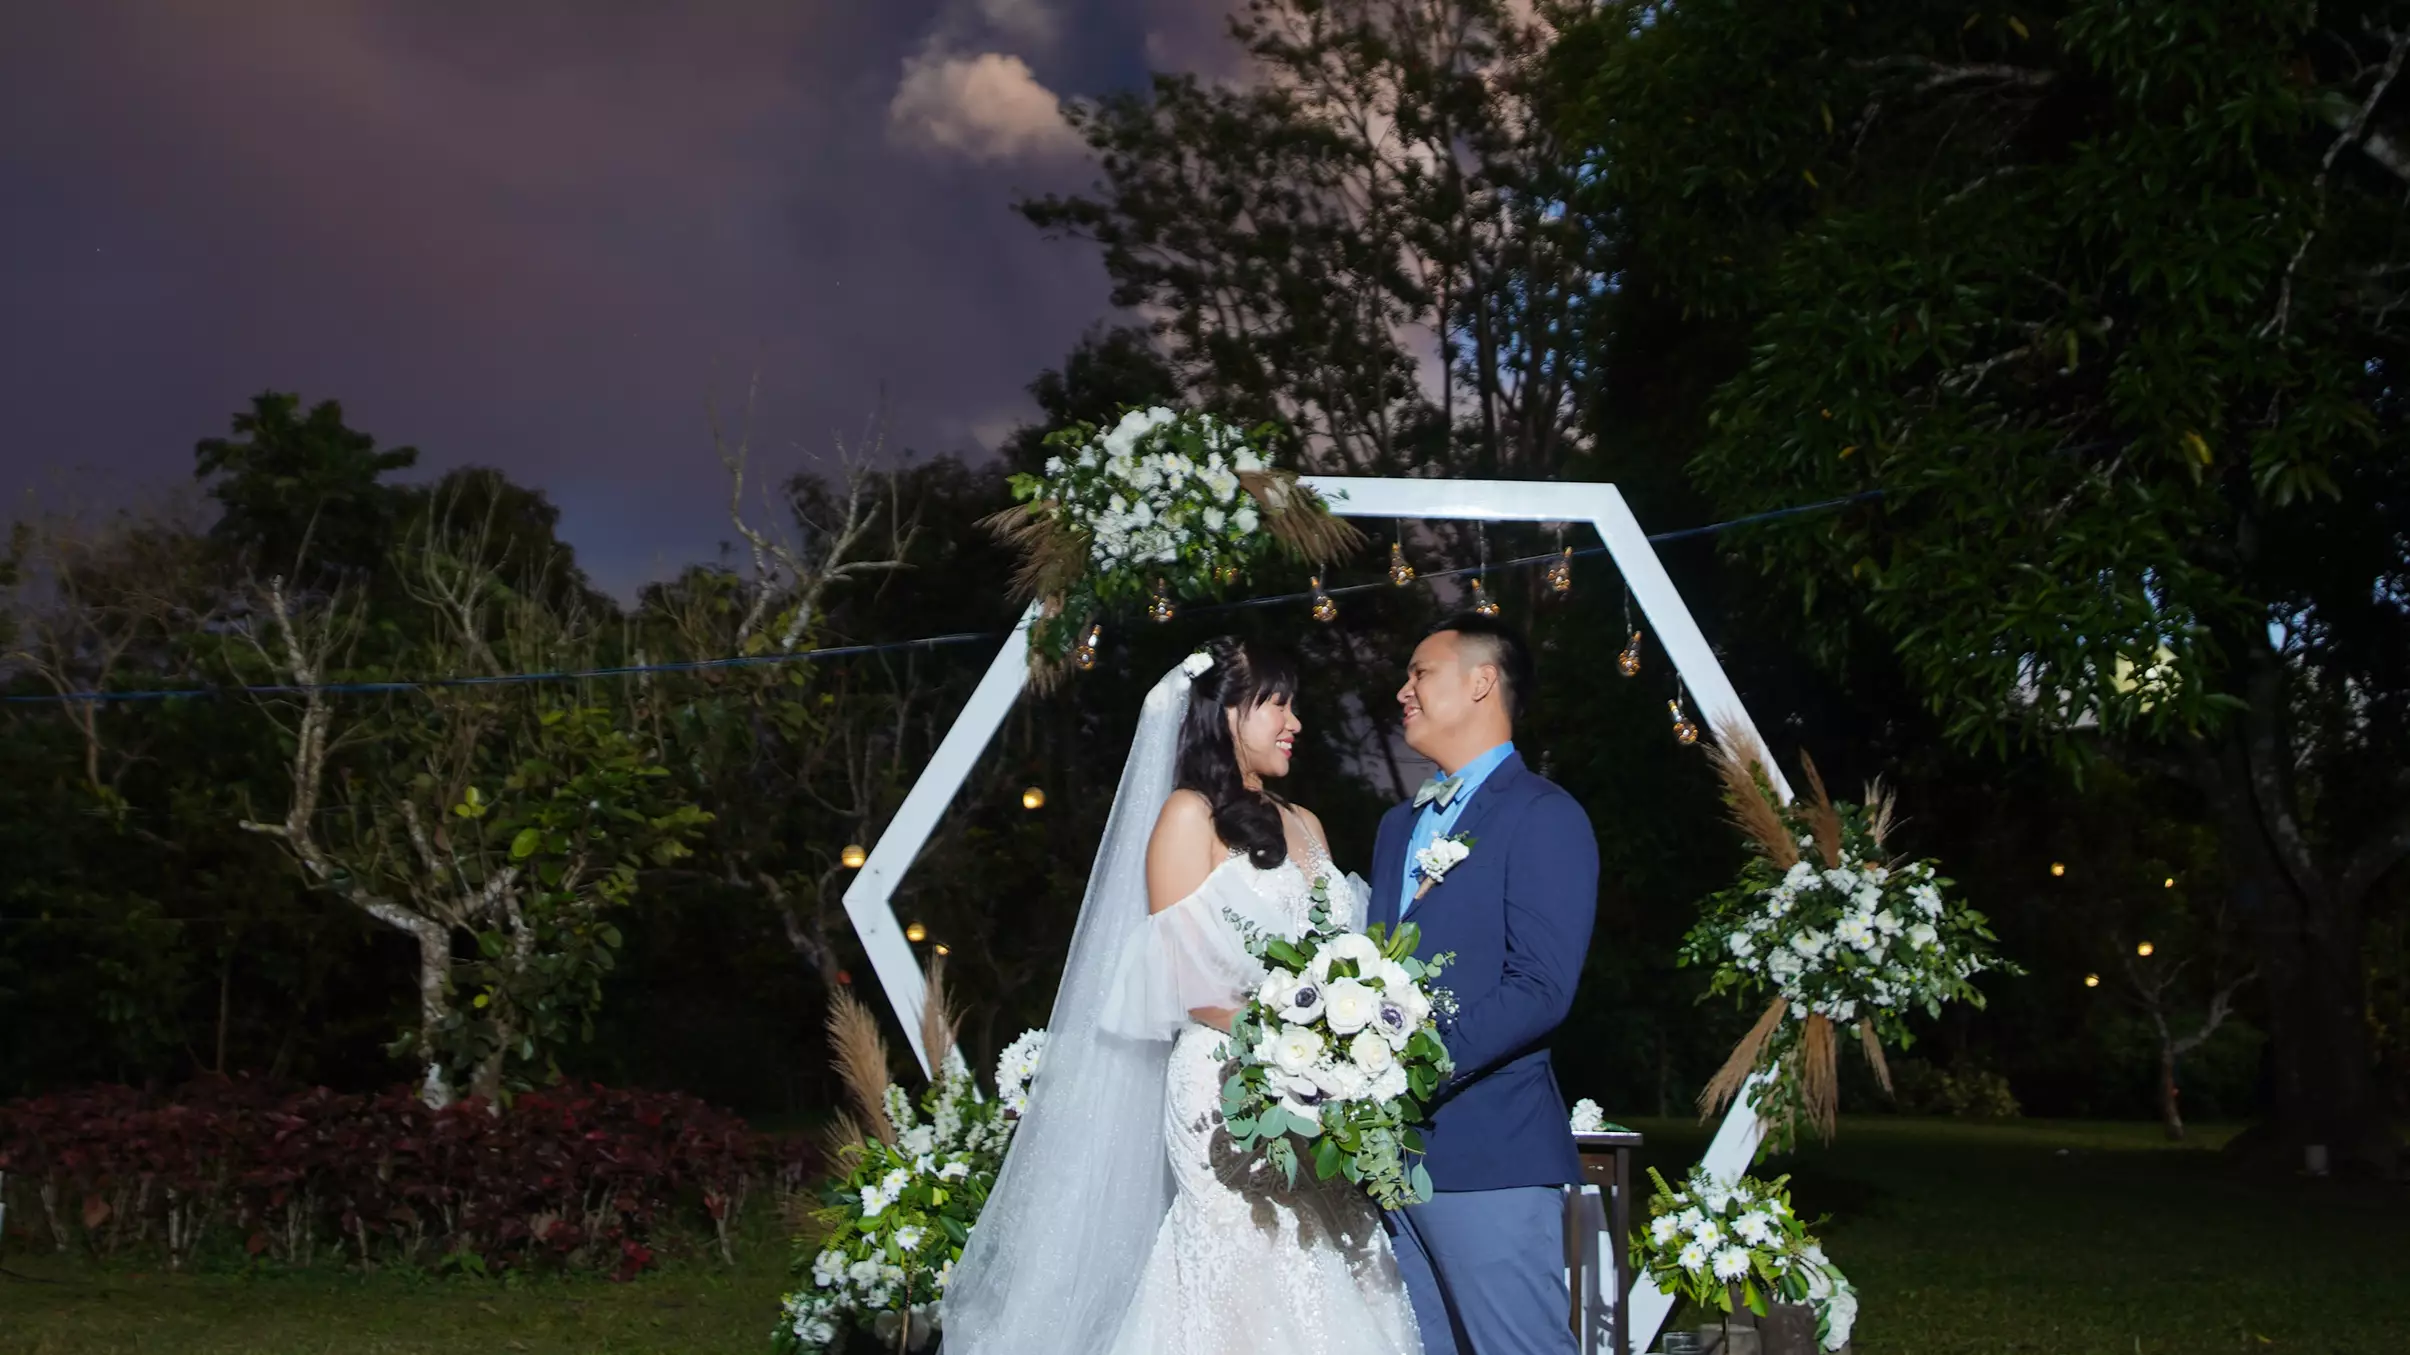 Couple Decide To Continue With Their Wedding Despite Volcanic Eruption